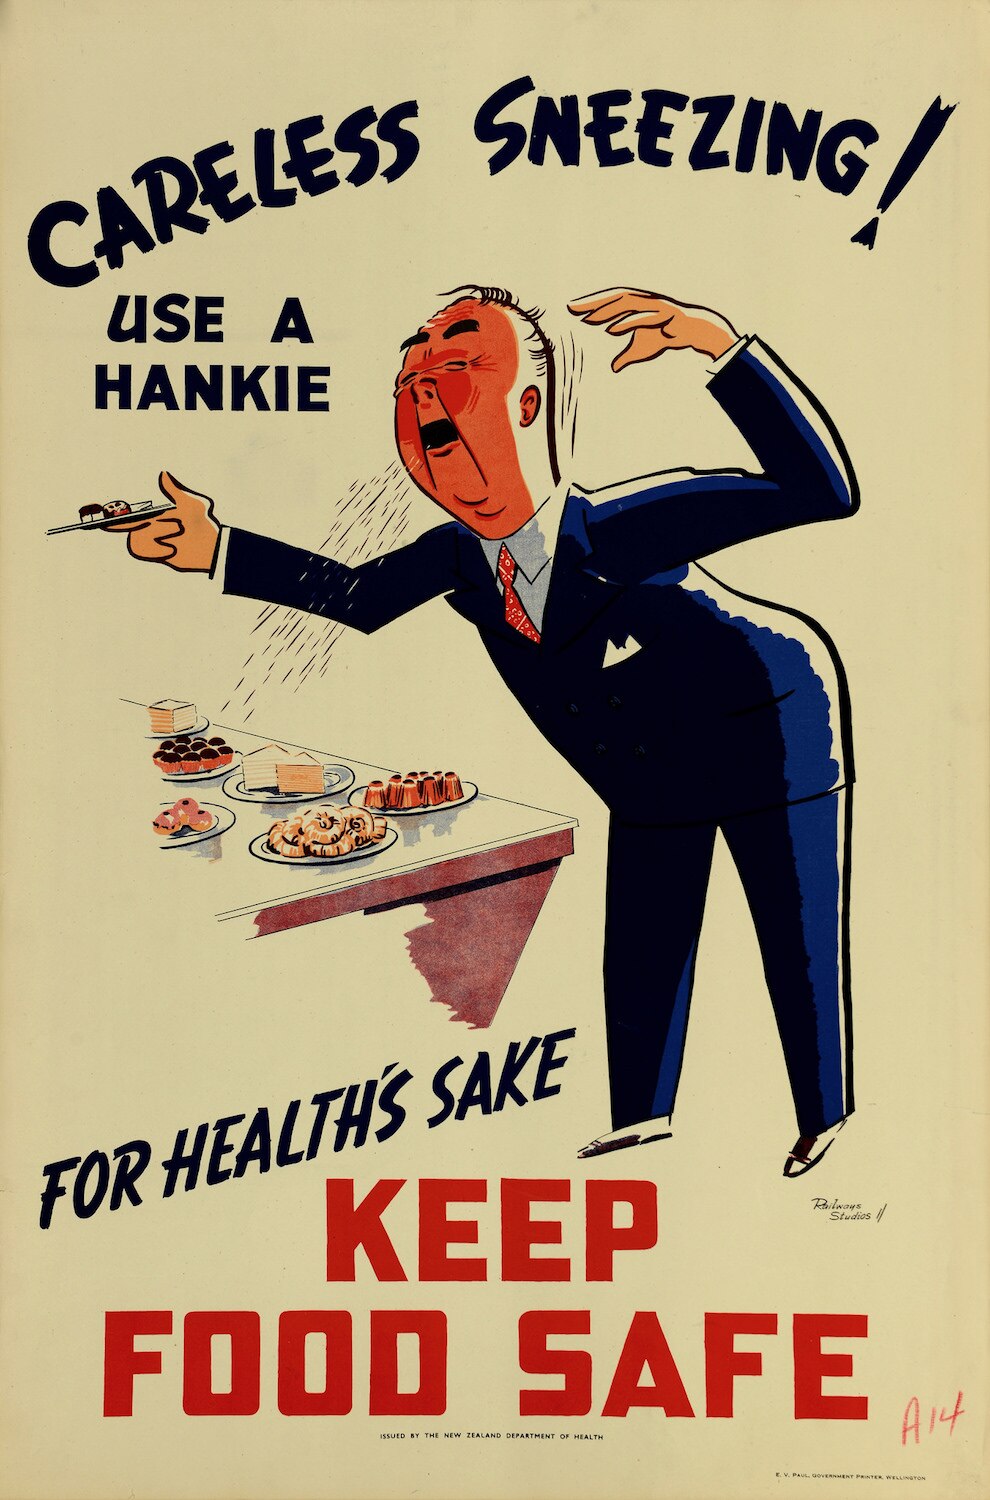 illustrational poster of a man sneezing over a table and onto plates of food